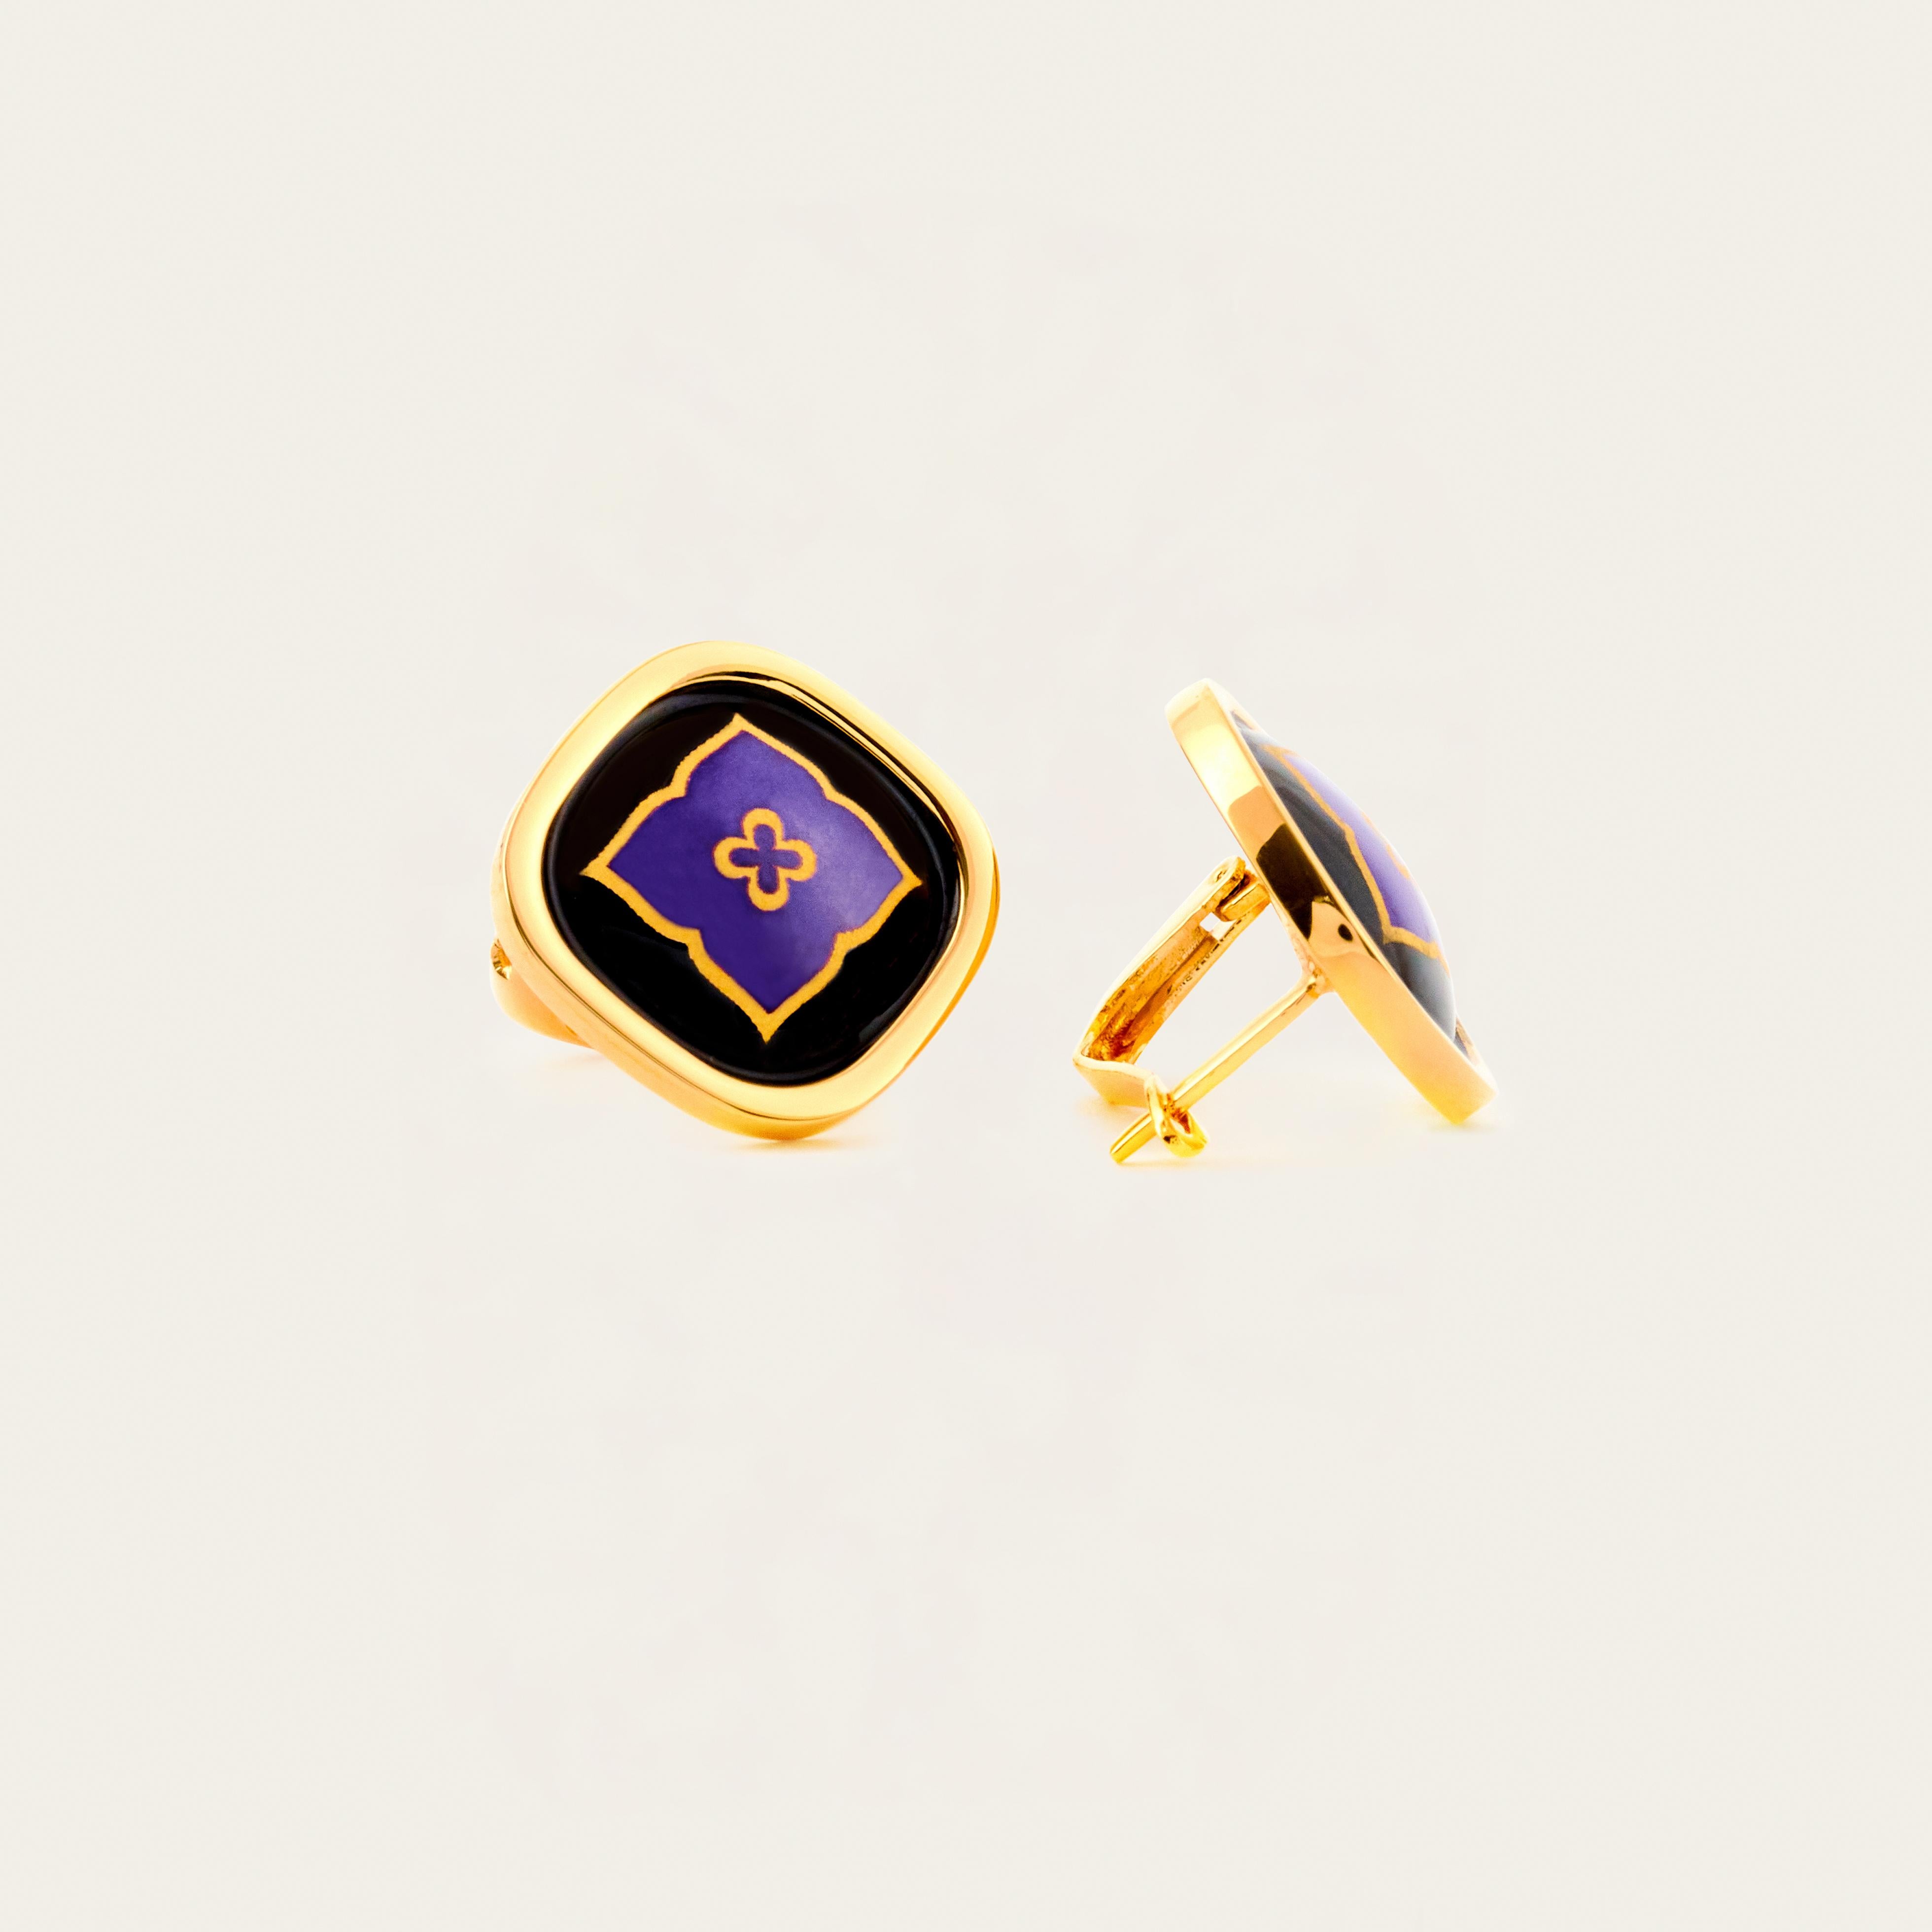 Introducing our Enigma Earring. Indulge in exquisite style with our 18k gold-plated stainless steel earrings. Hand-painted with vibrant fire enamel, these hypoallergenic earrings are a true masterpiece of luxury and beauty. Shop now and elevate your